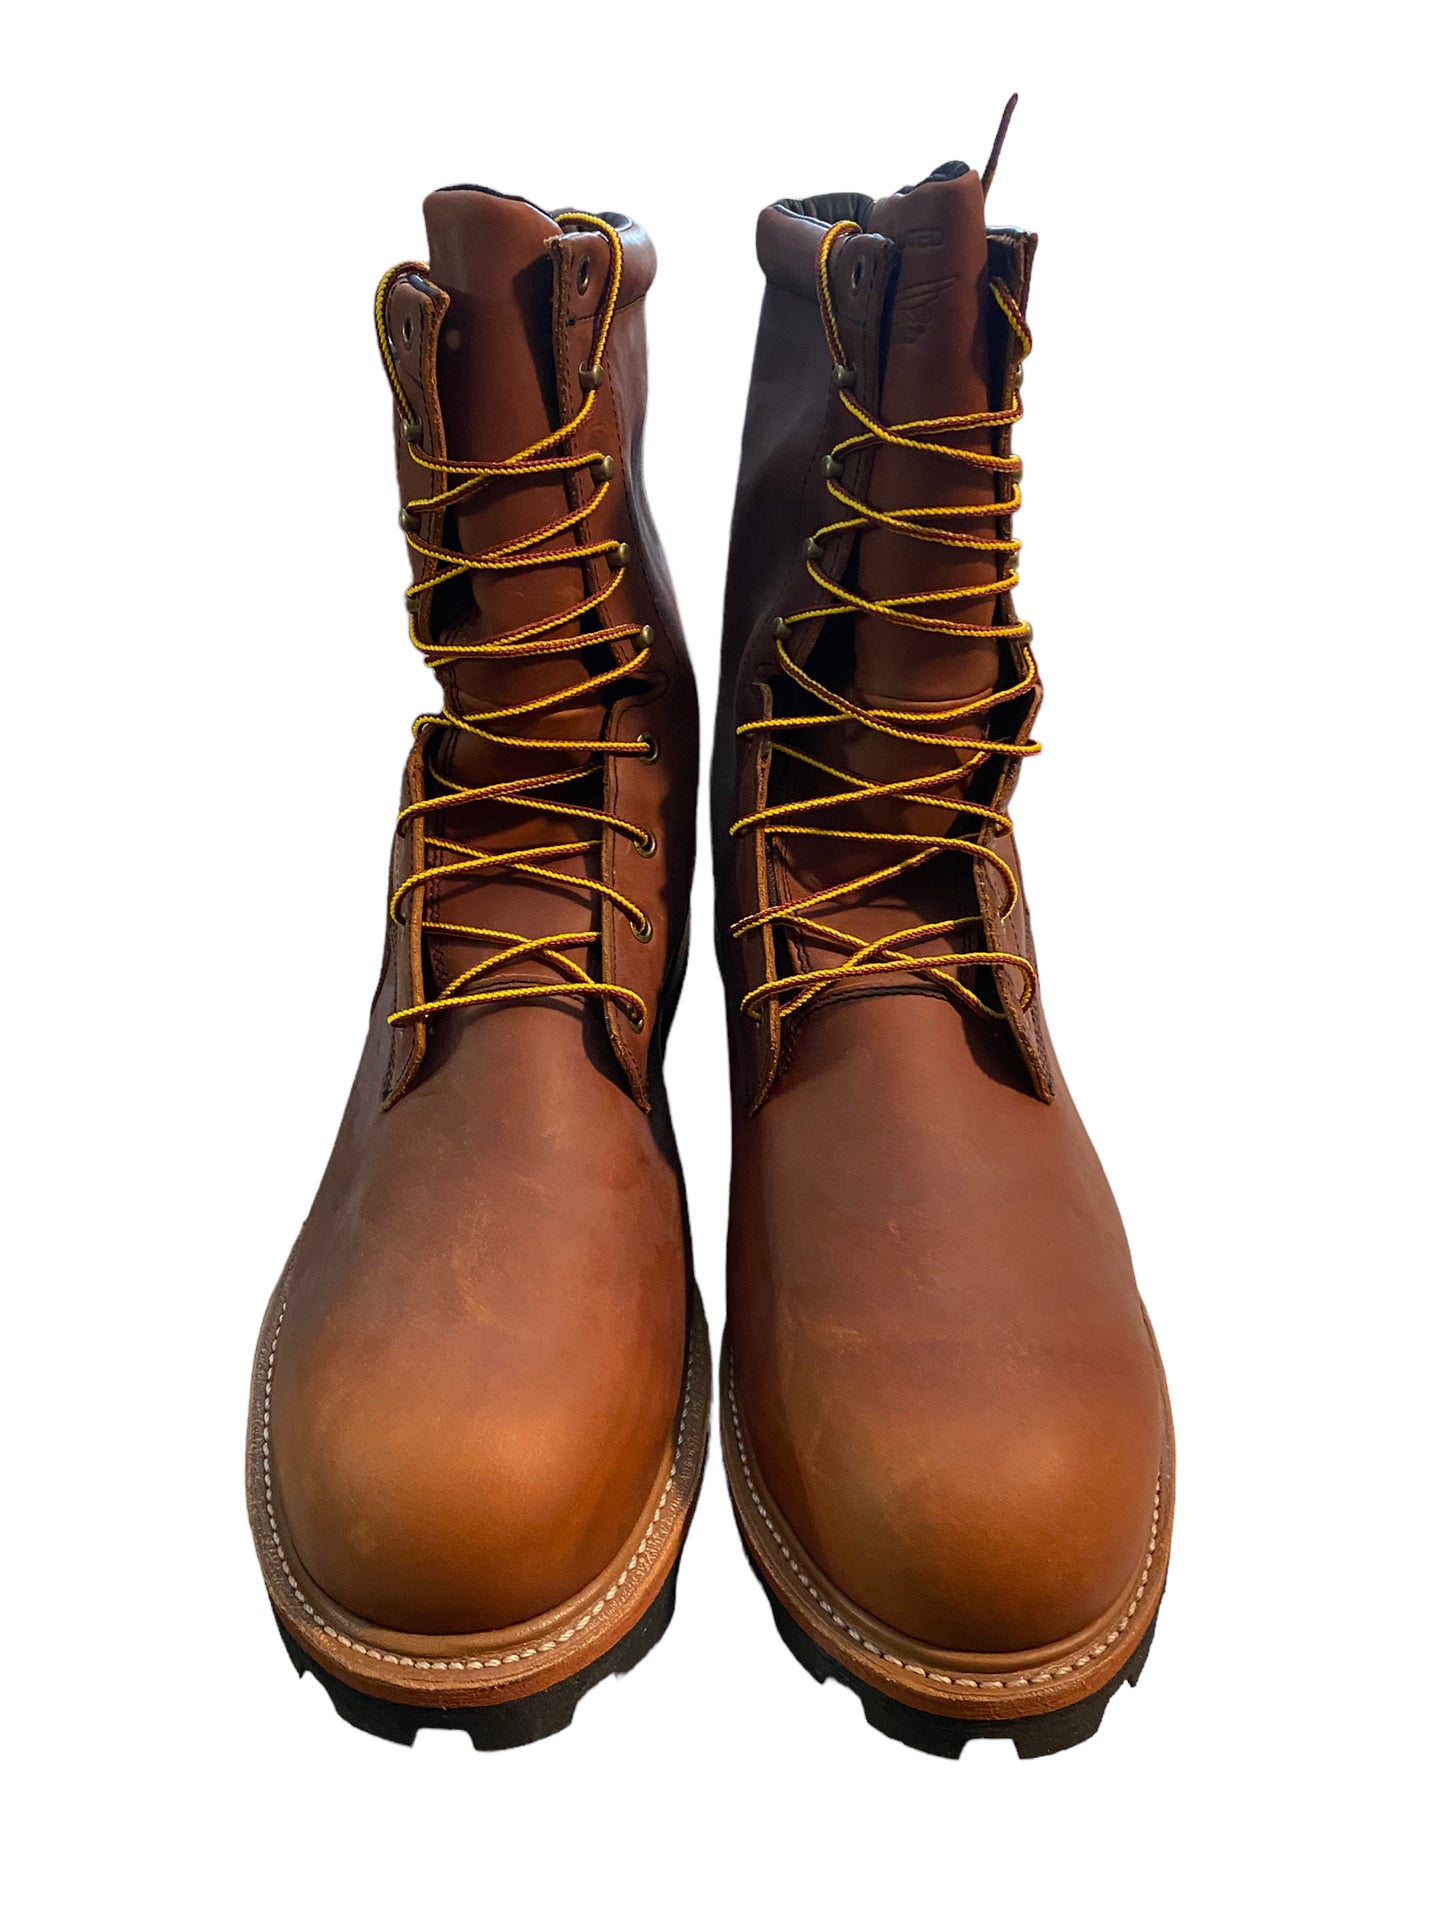 Red Wing Boots Brown Leather Boots